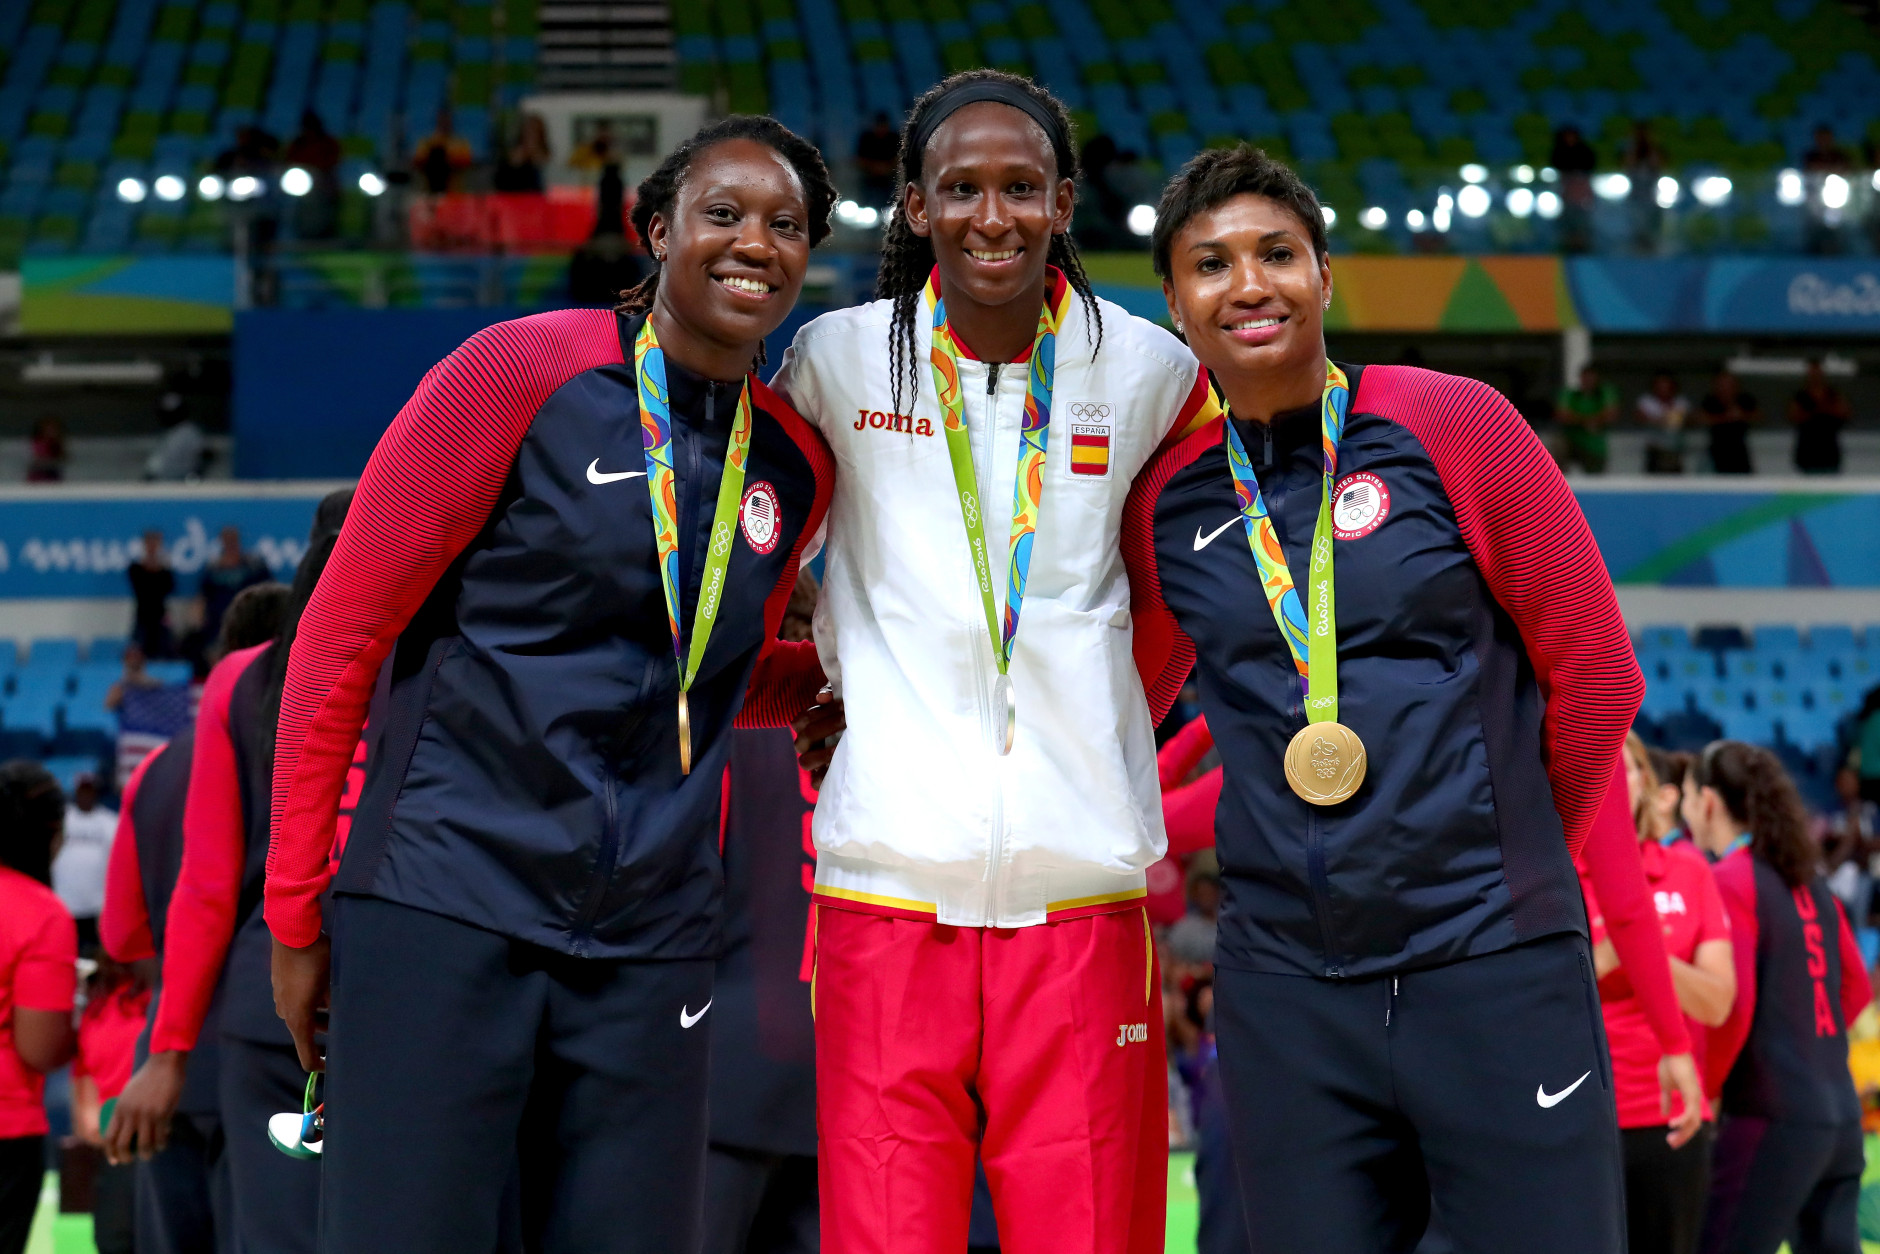 RIO DE JANEIRO, BRAZIL - AUGUST 20:  (L-R) Gold medalist Tina Charles #14 of United States, Silver medalist Astou Ndour Gueye #45 of Spain, and gold medalist Angel Mccoughtry #8 of United States celebrate after the Women's Basketball competition on Day 15 of the Rio 2016 Olympic Games at Carioca Arena 1 on August 20, 2016 in Rio de Janeiro, Brazil.  (Photo by Tom Pennington/Getty Images)